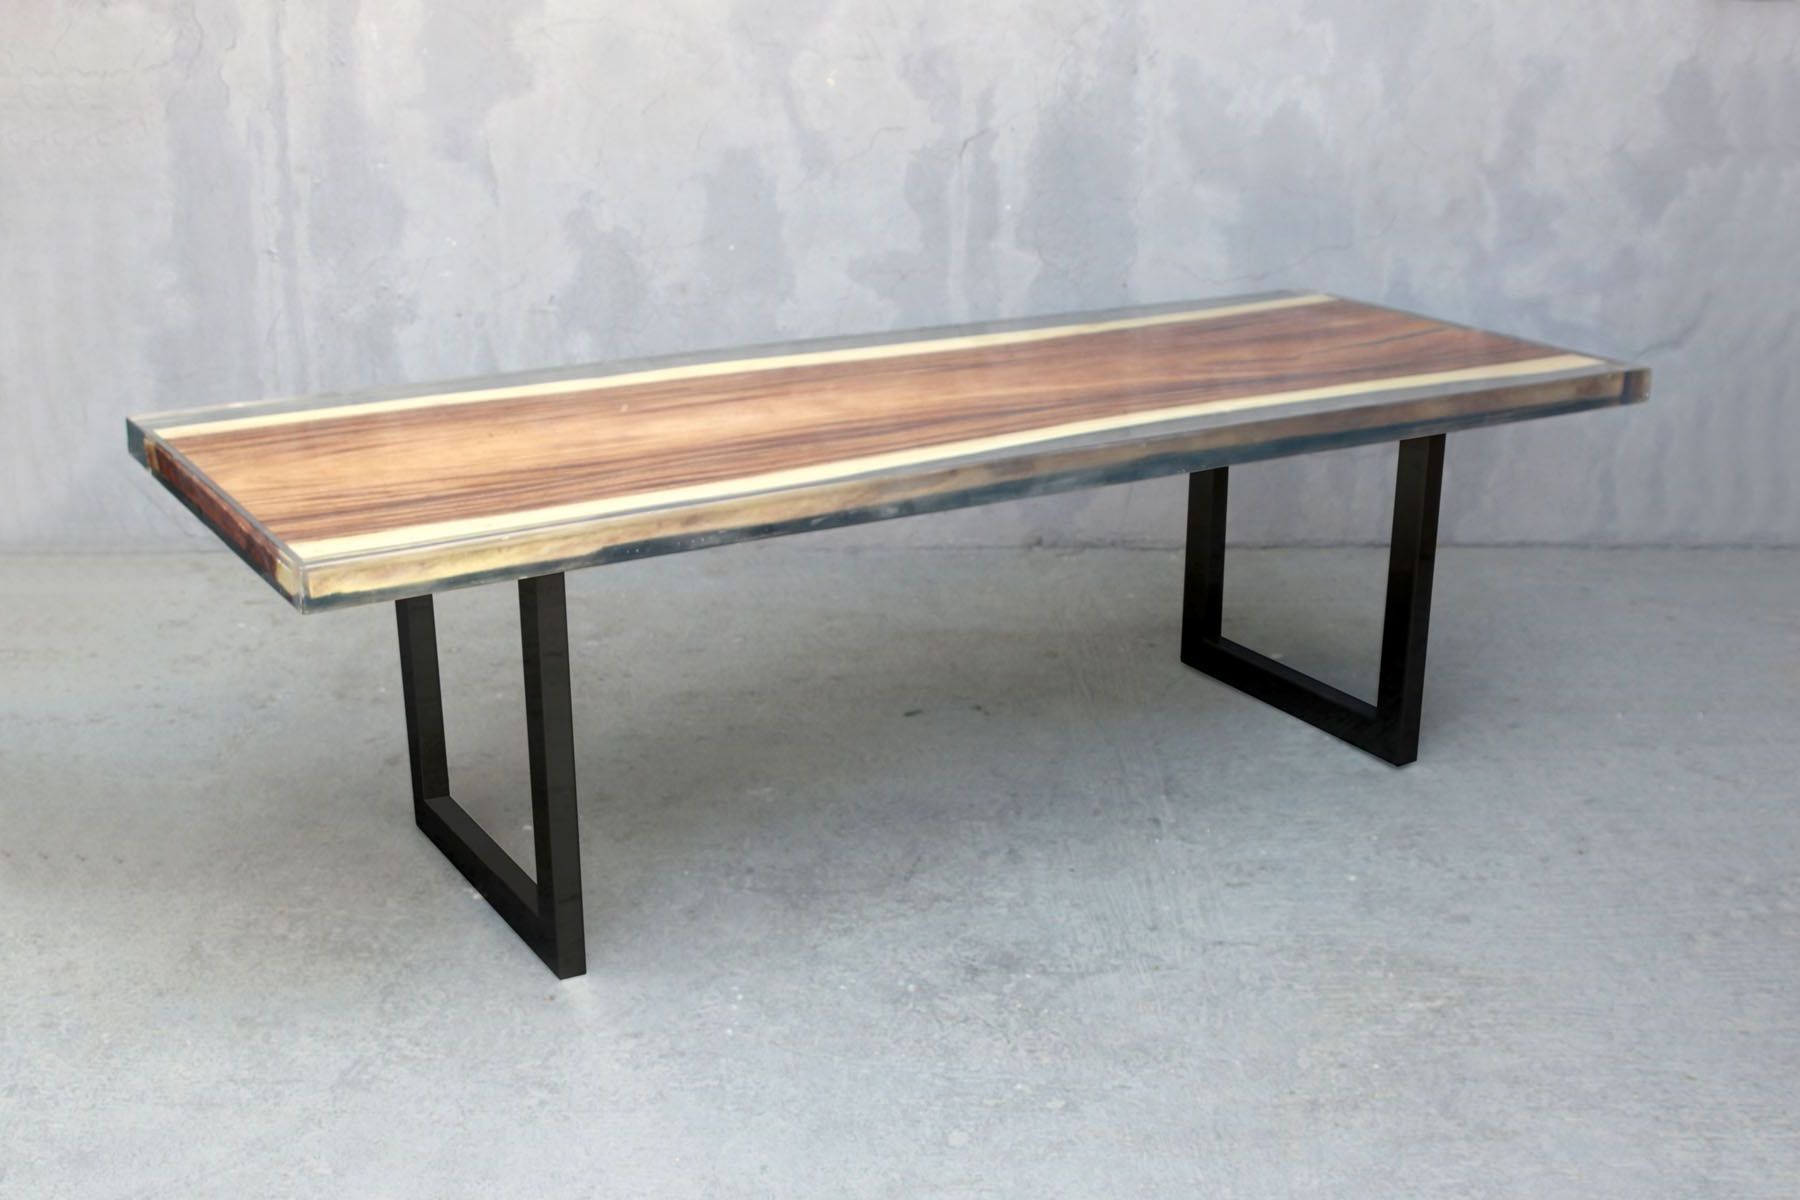 Most Recent Acacia Dining Tables With Black Legs Within Acacia Wood Slab Dining Table With Clear Resin And Black (View 7 of 25)